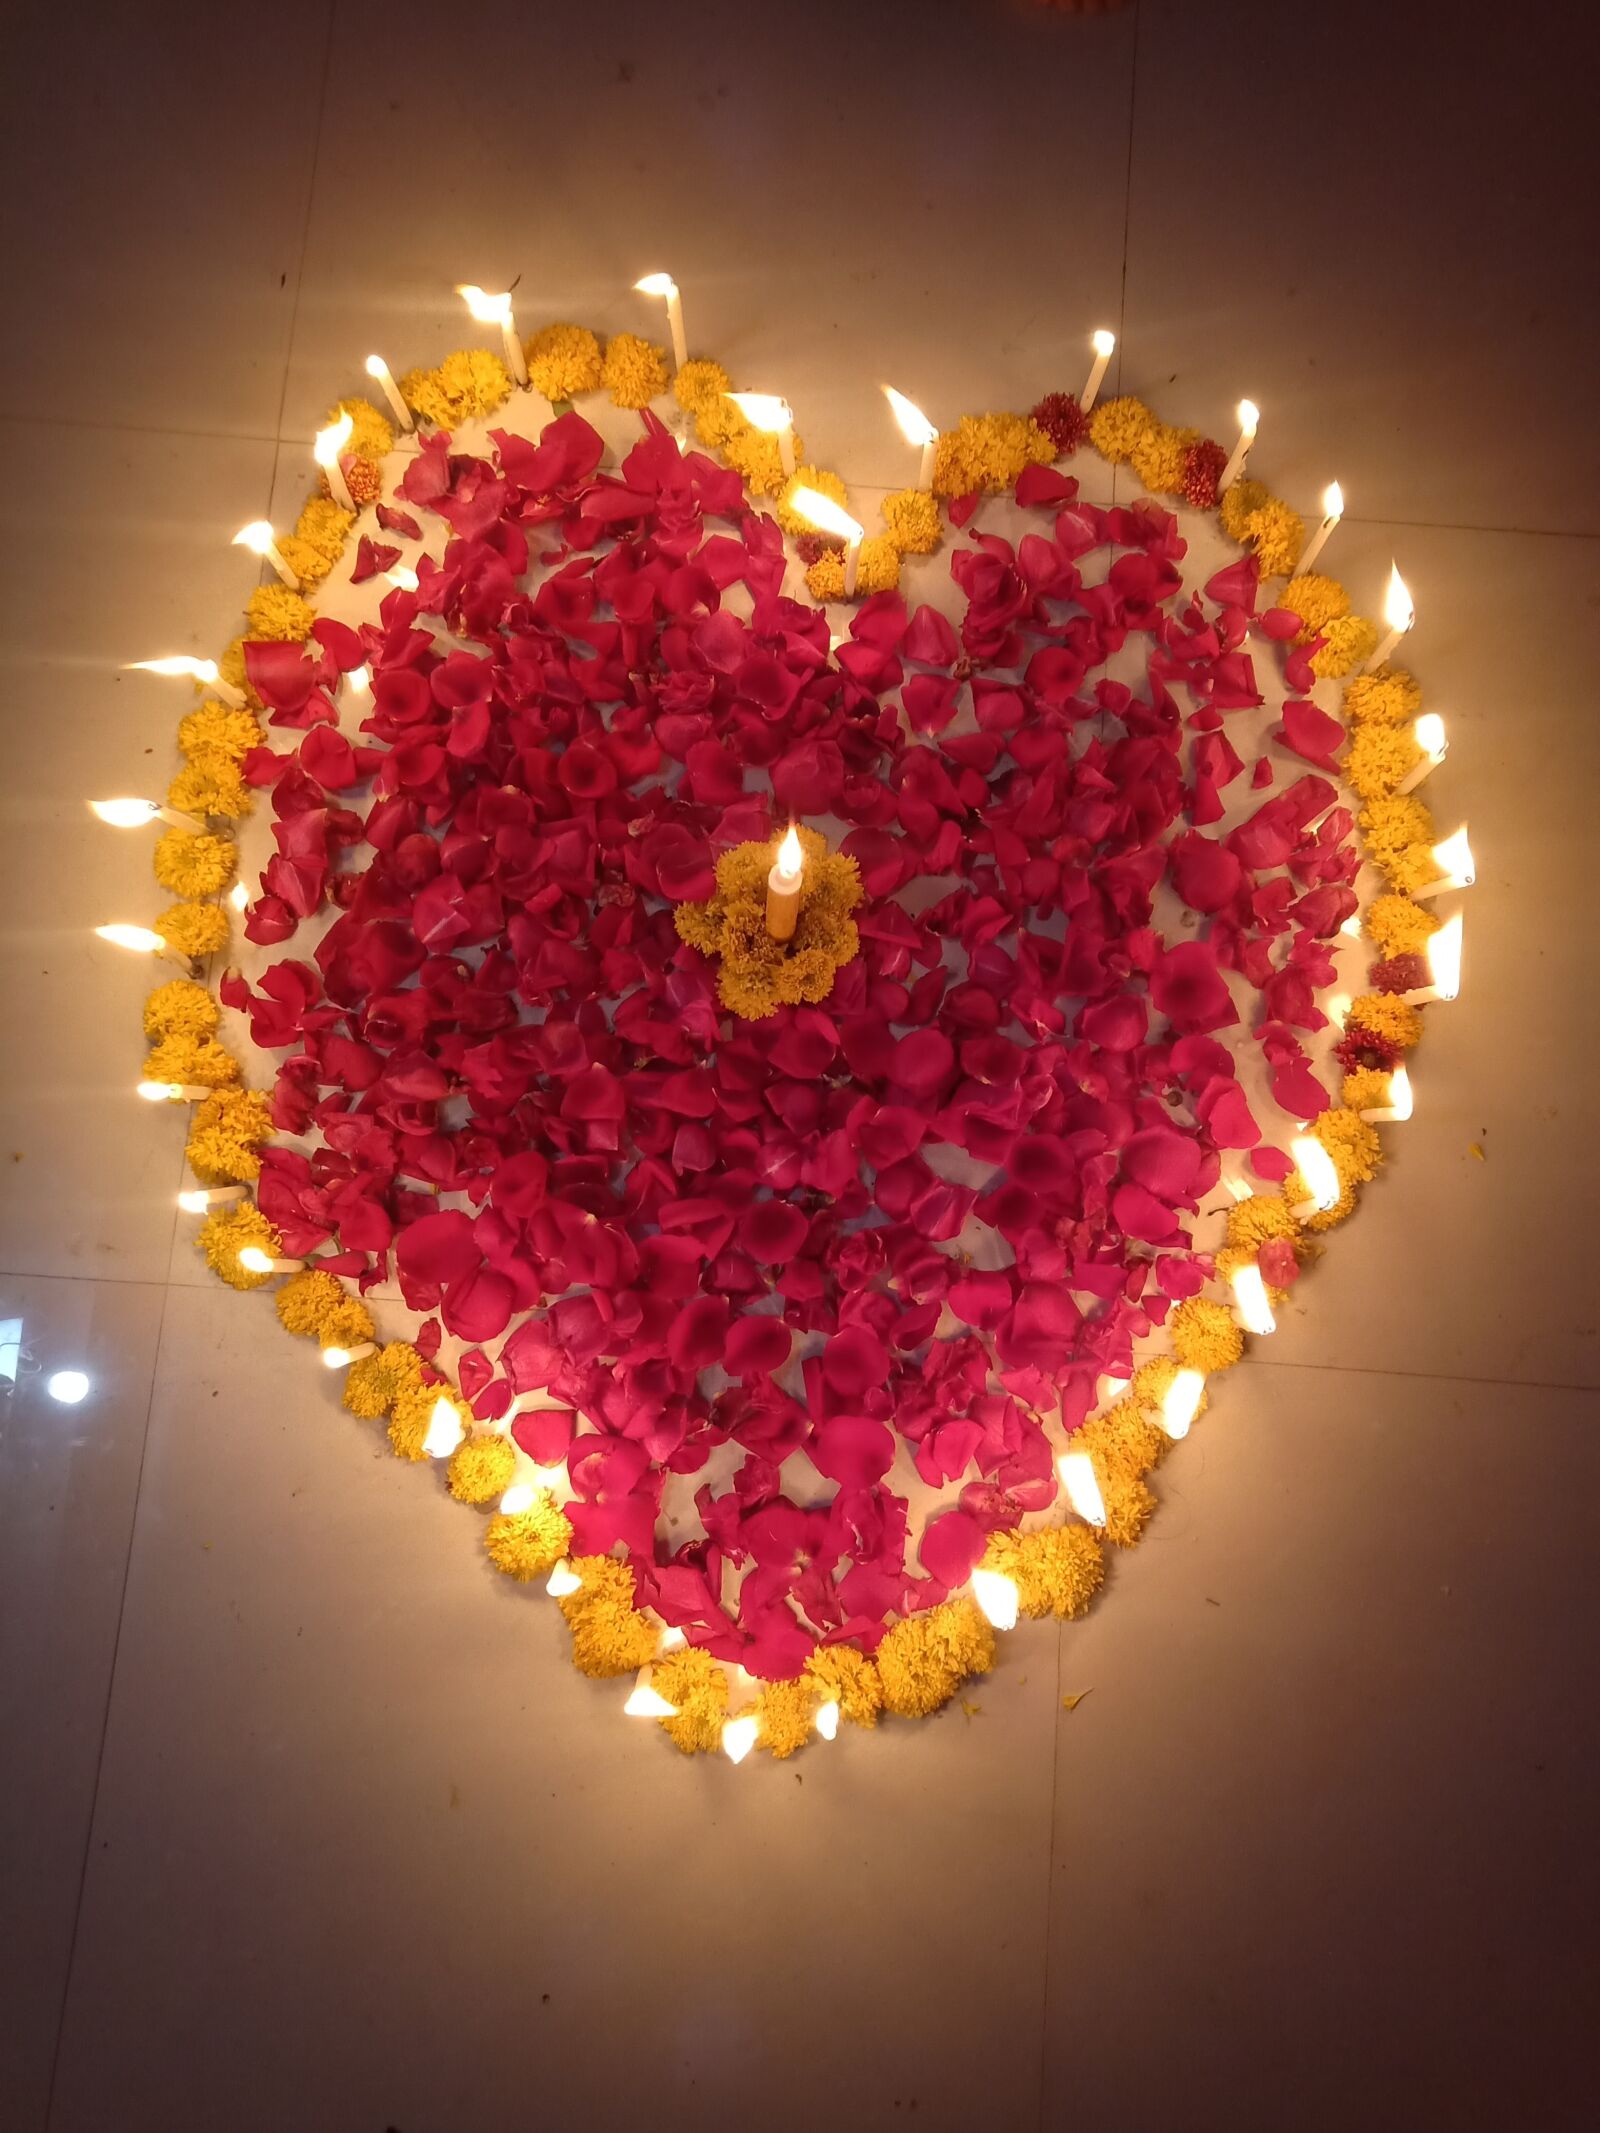 OPPO Realme 1 sample photo. Honeymoon, candle, decoration photography